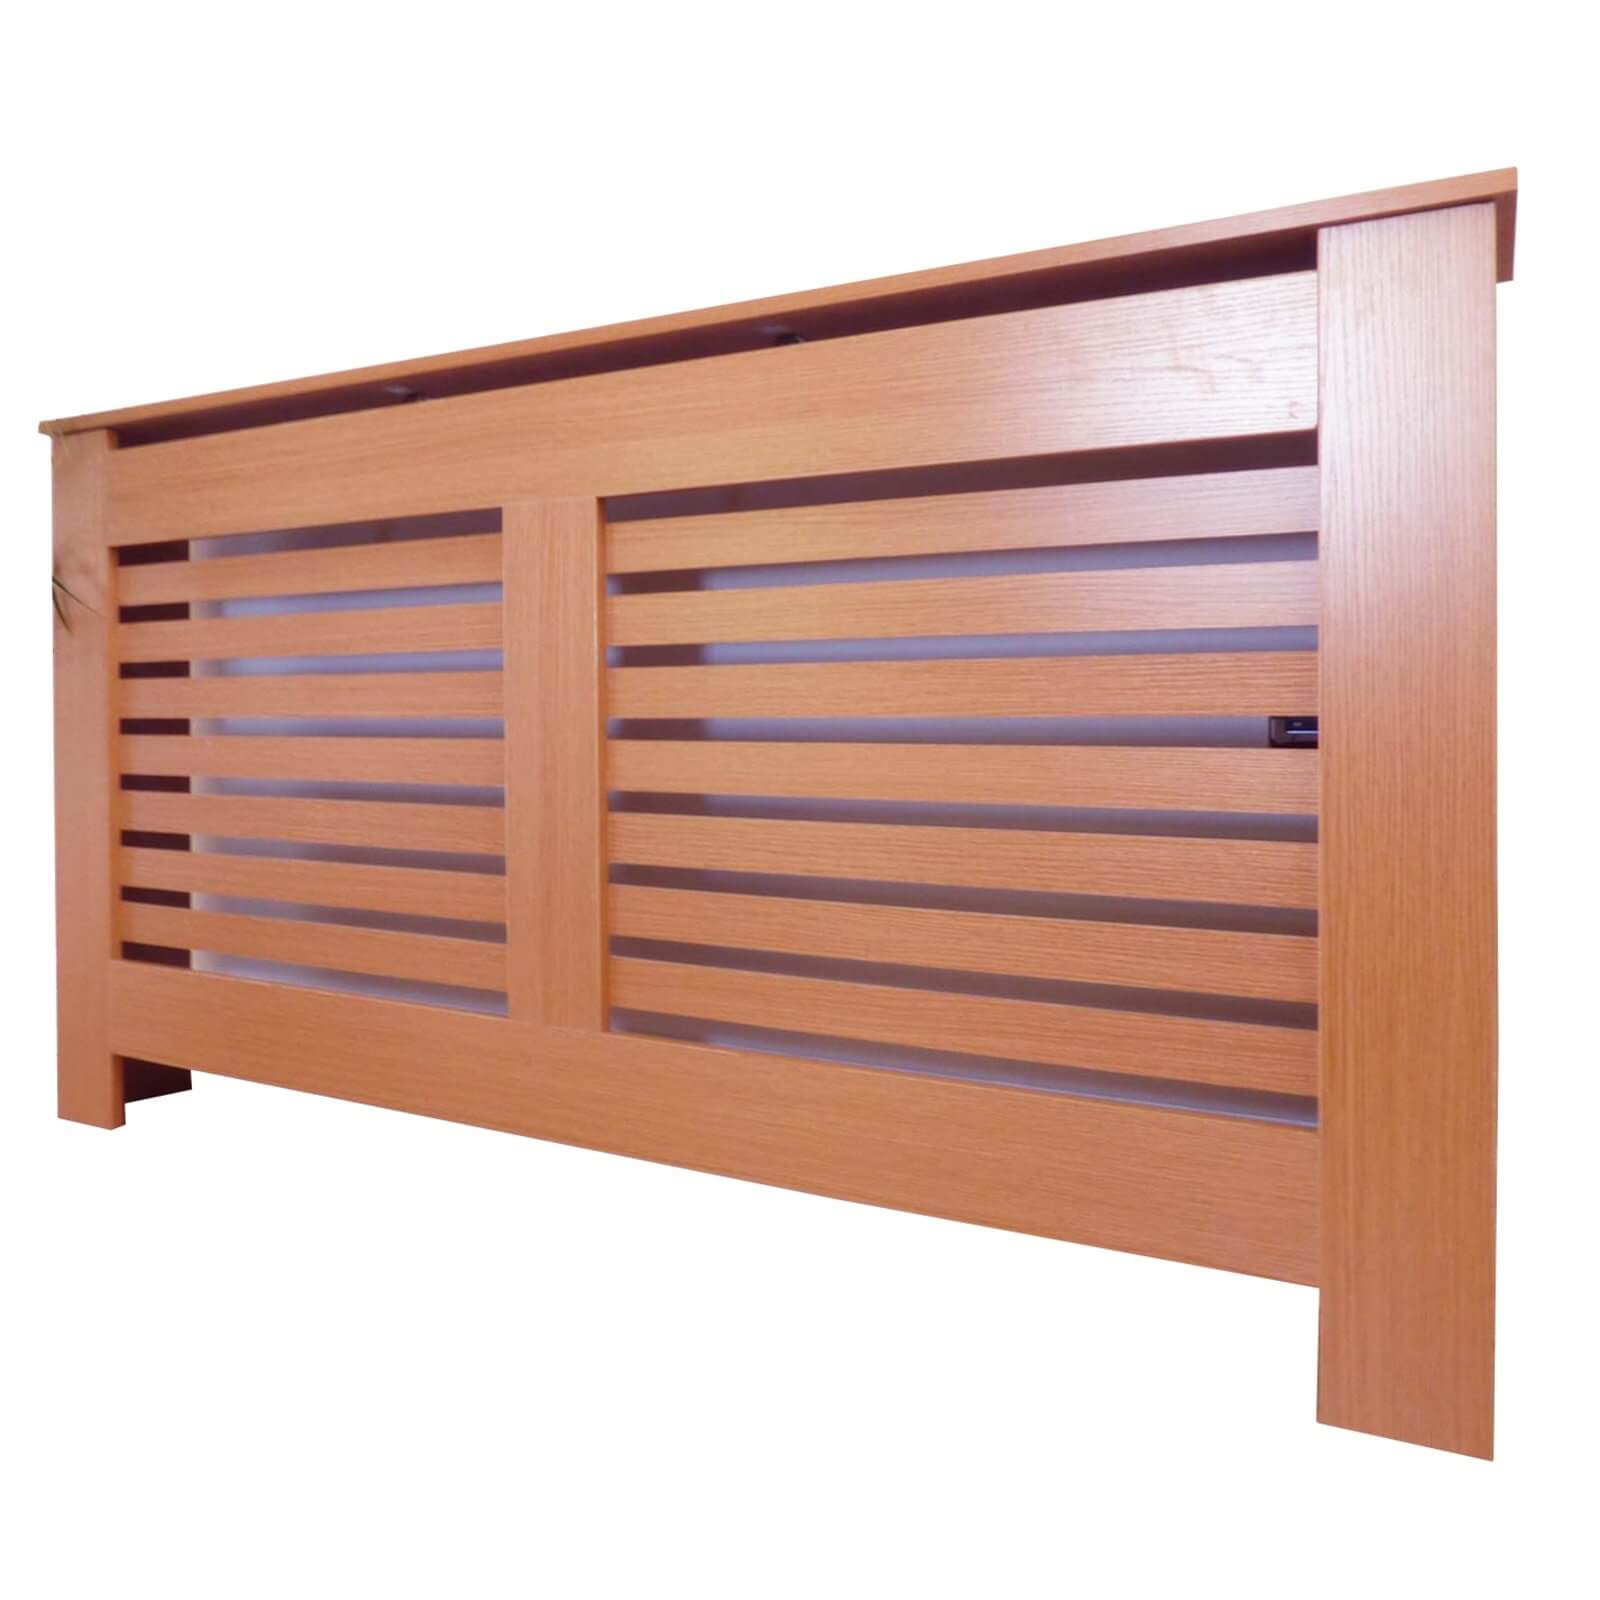 Radiator Cover with Horizontal Slatted Design in Oak - Large